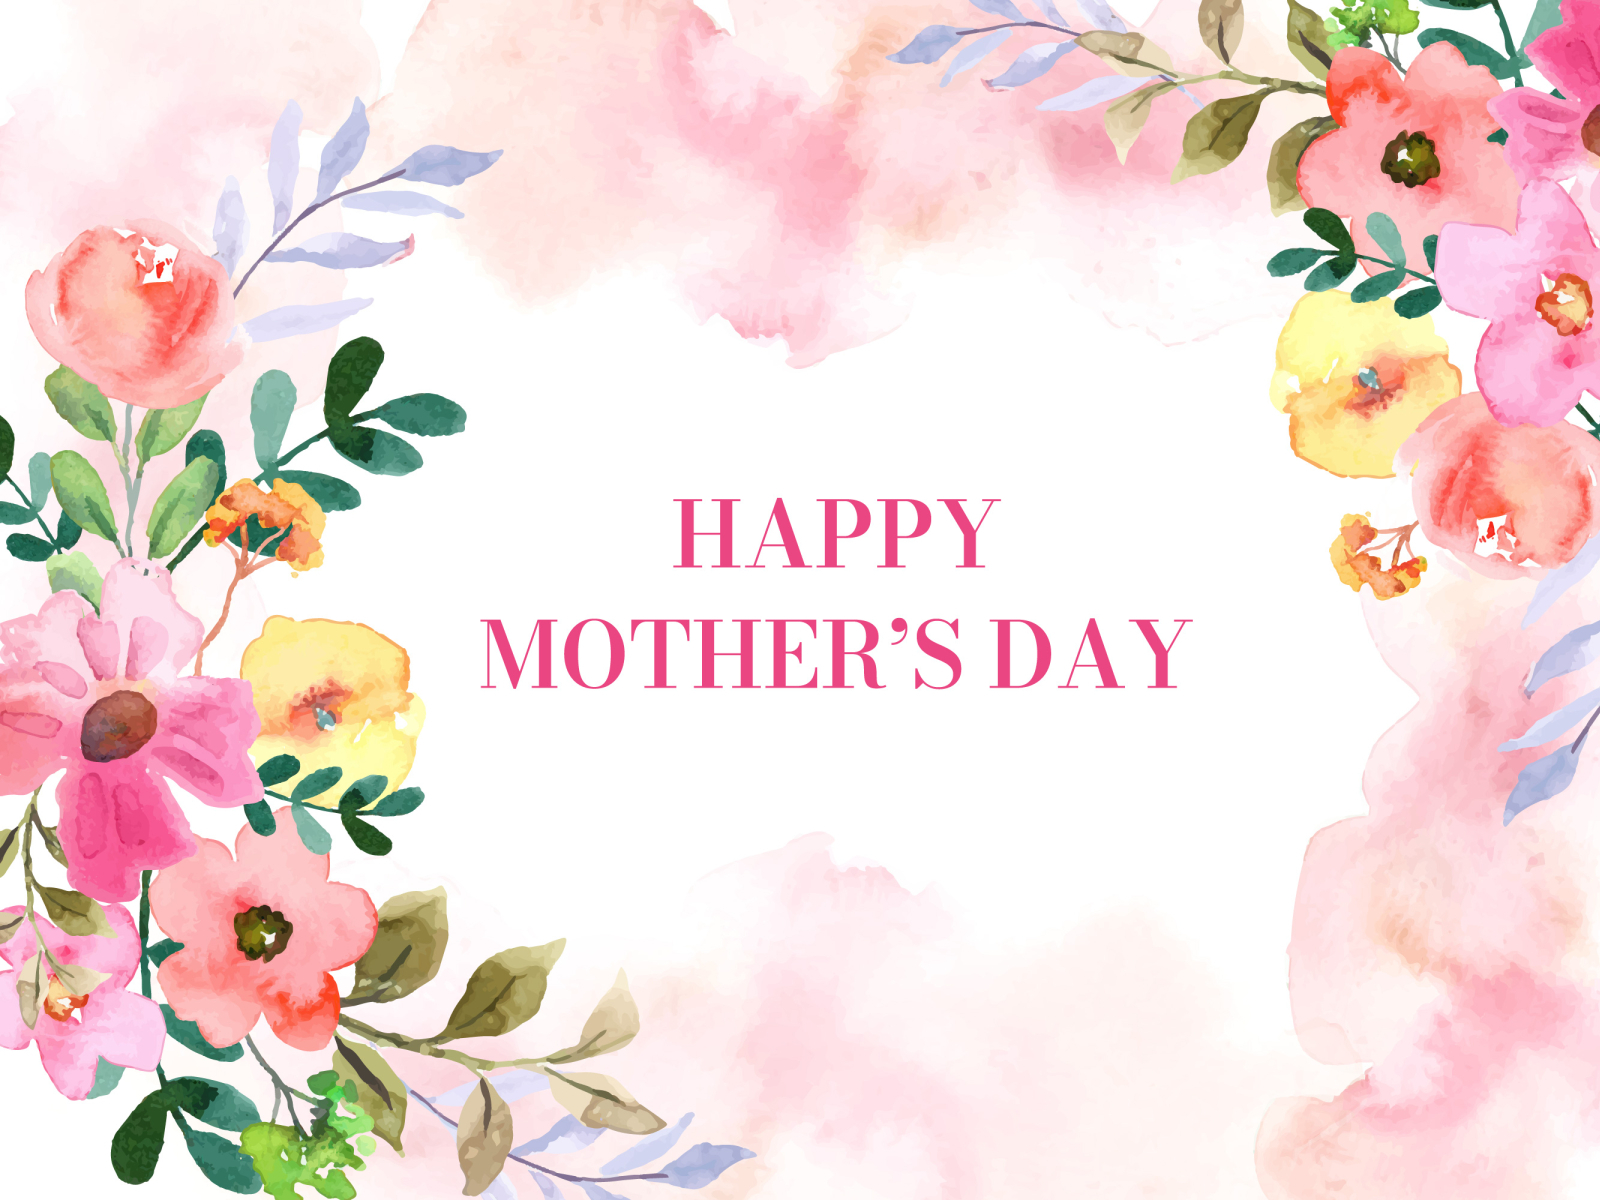 Mothers Day Watercolor Background by Banyuwerno Creative on Dribbble